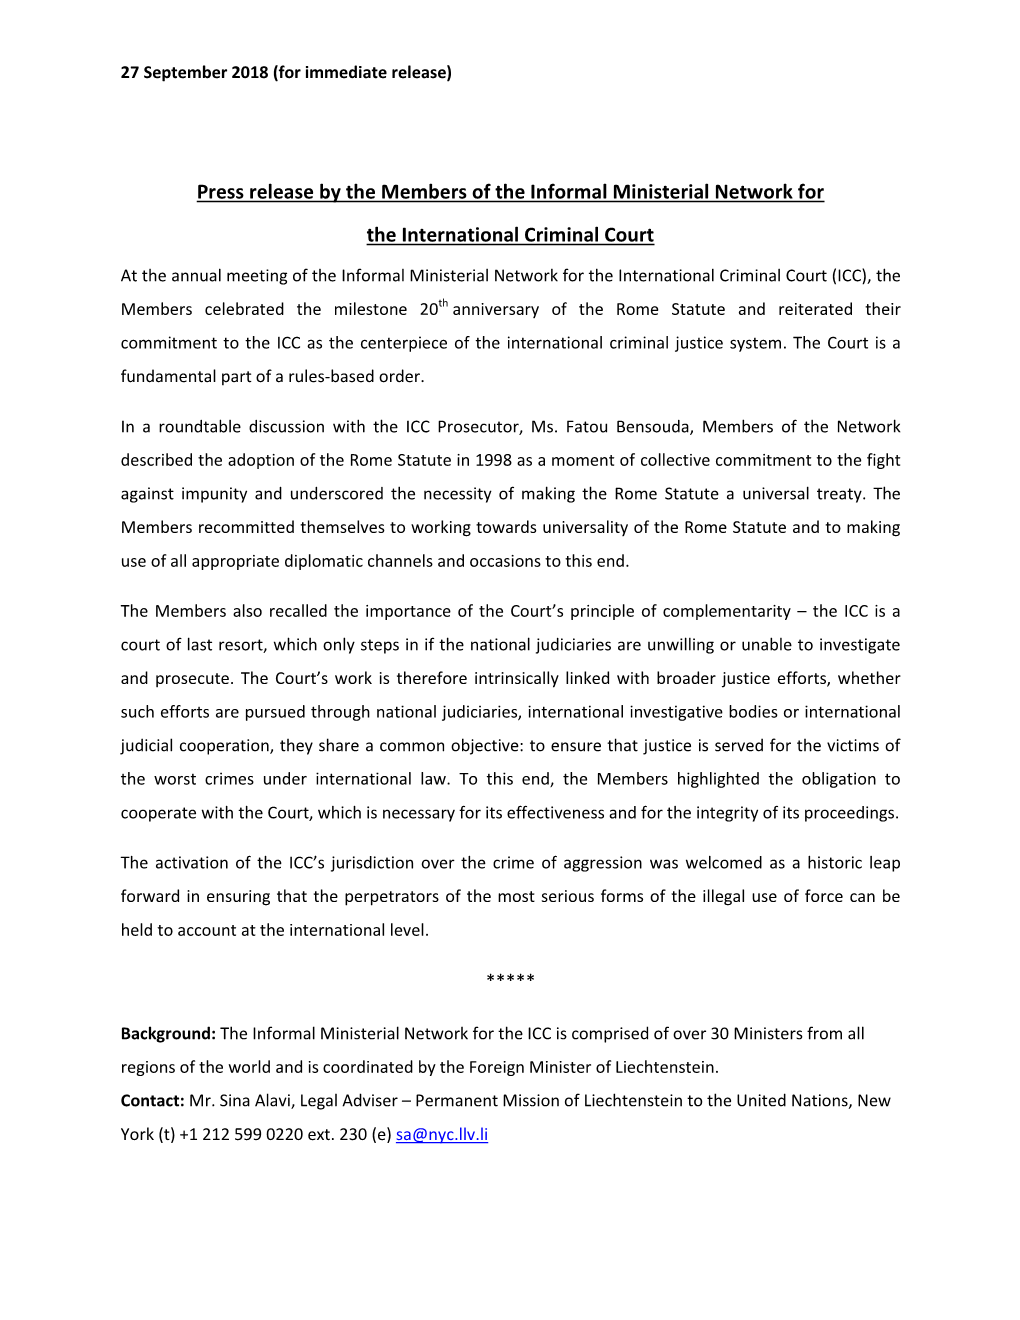 Press Release by the Members of the Informal Ministerial Network for The